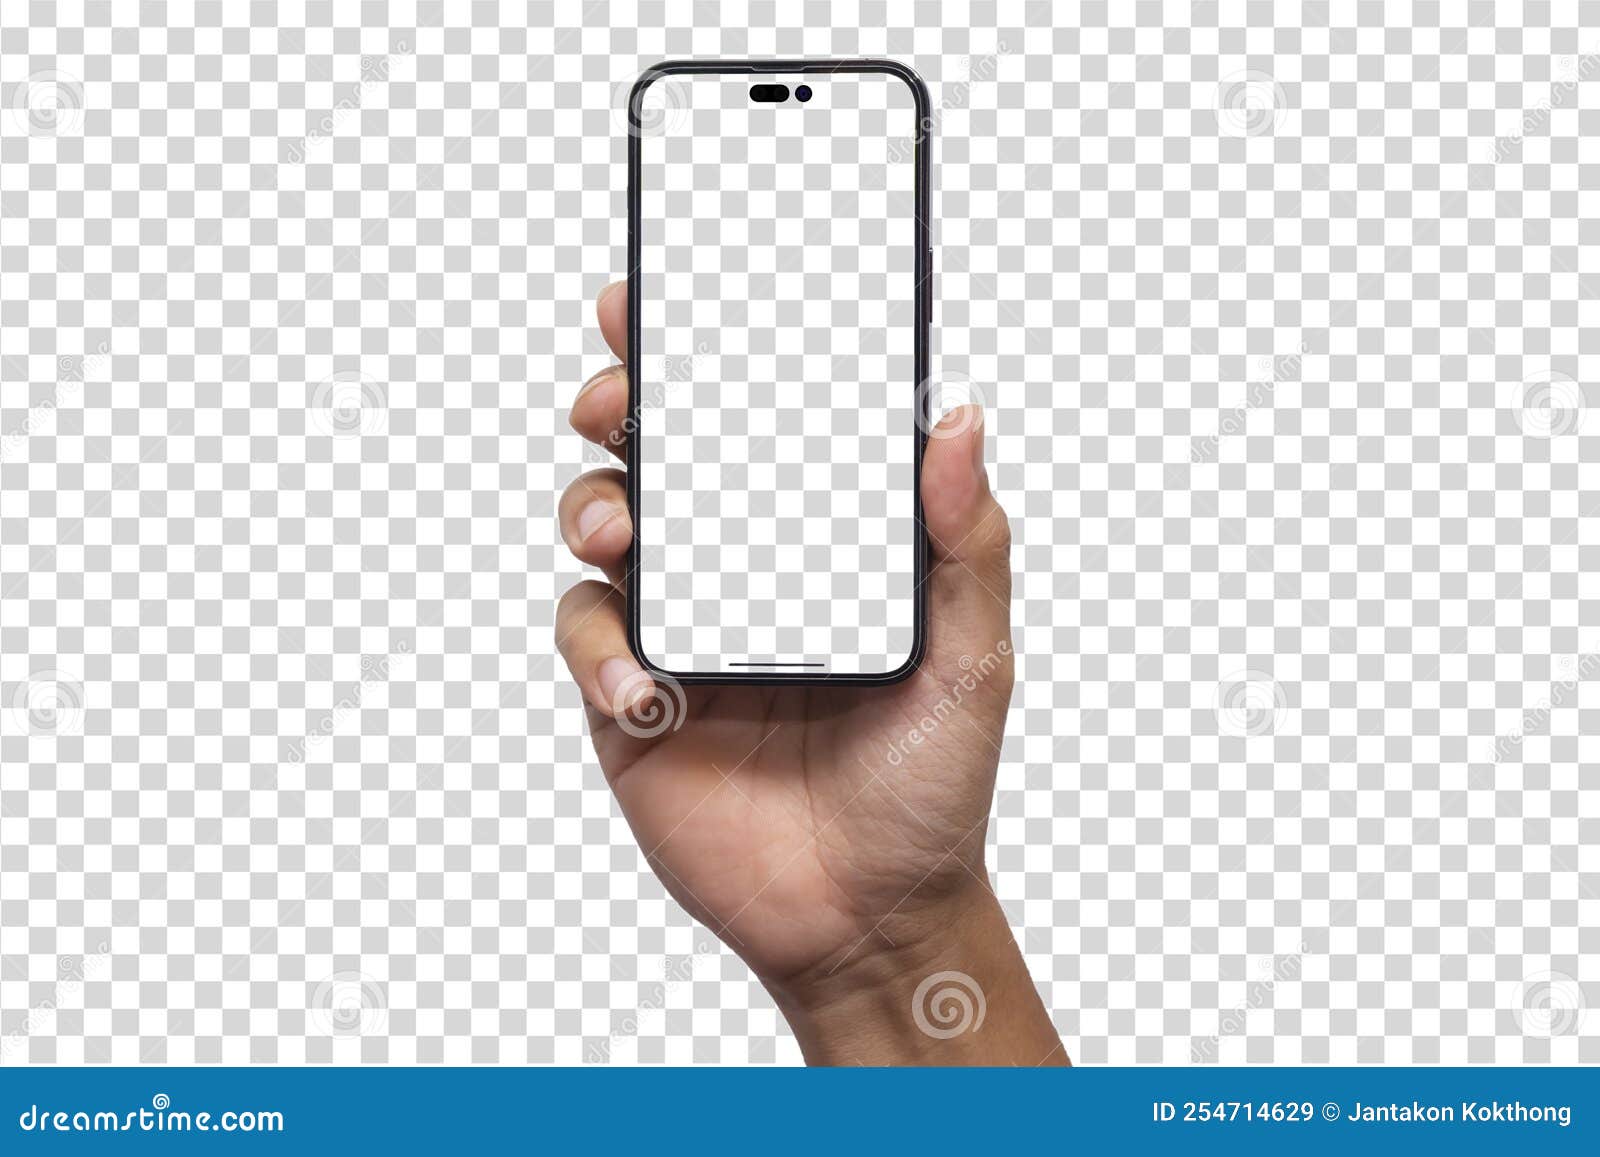 mockup iphone 14 pro max and new iphon mini. mock up screen iphone x . transparent and clipping path 